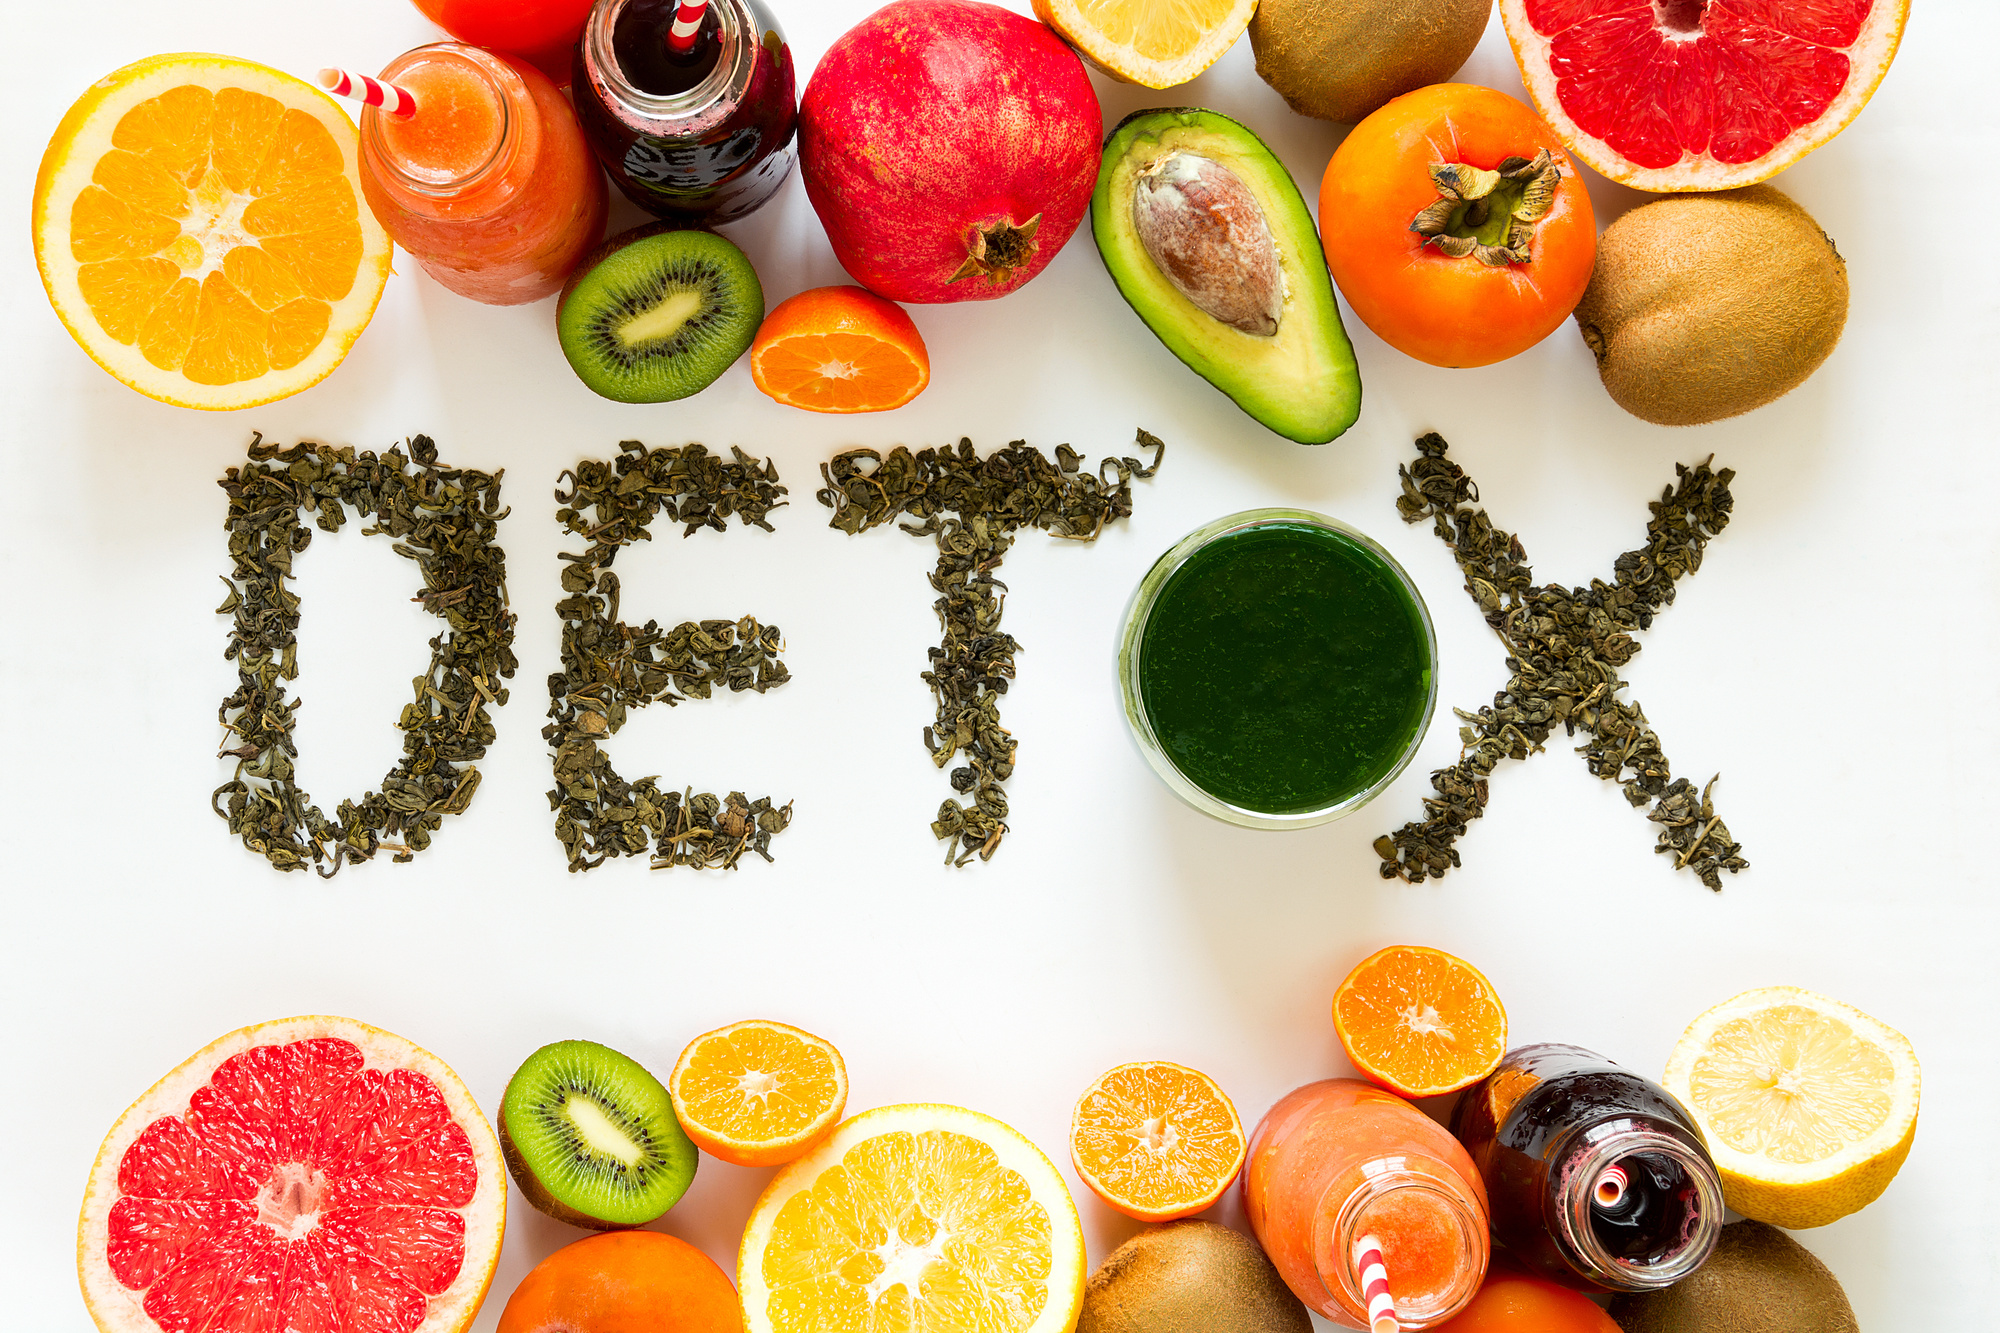 Detox Tips: 5 Things To Do When Following A Detoxification Diet